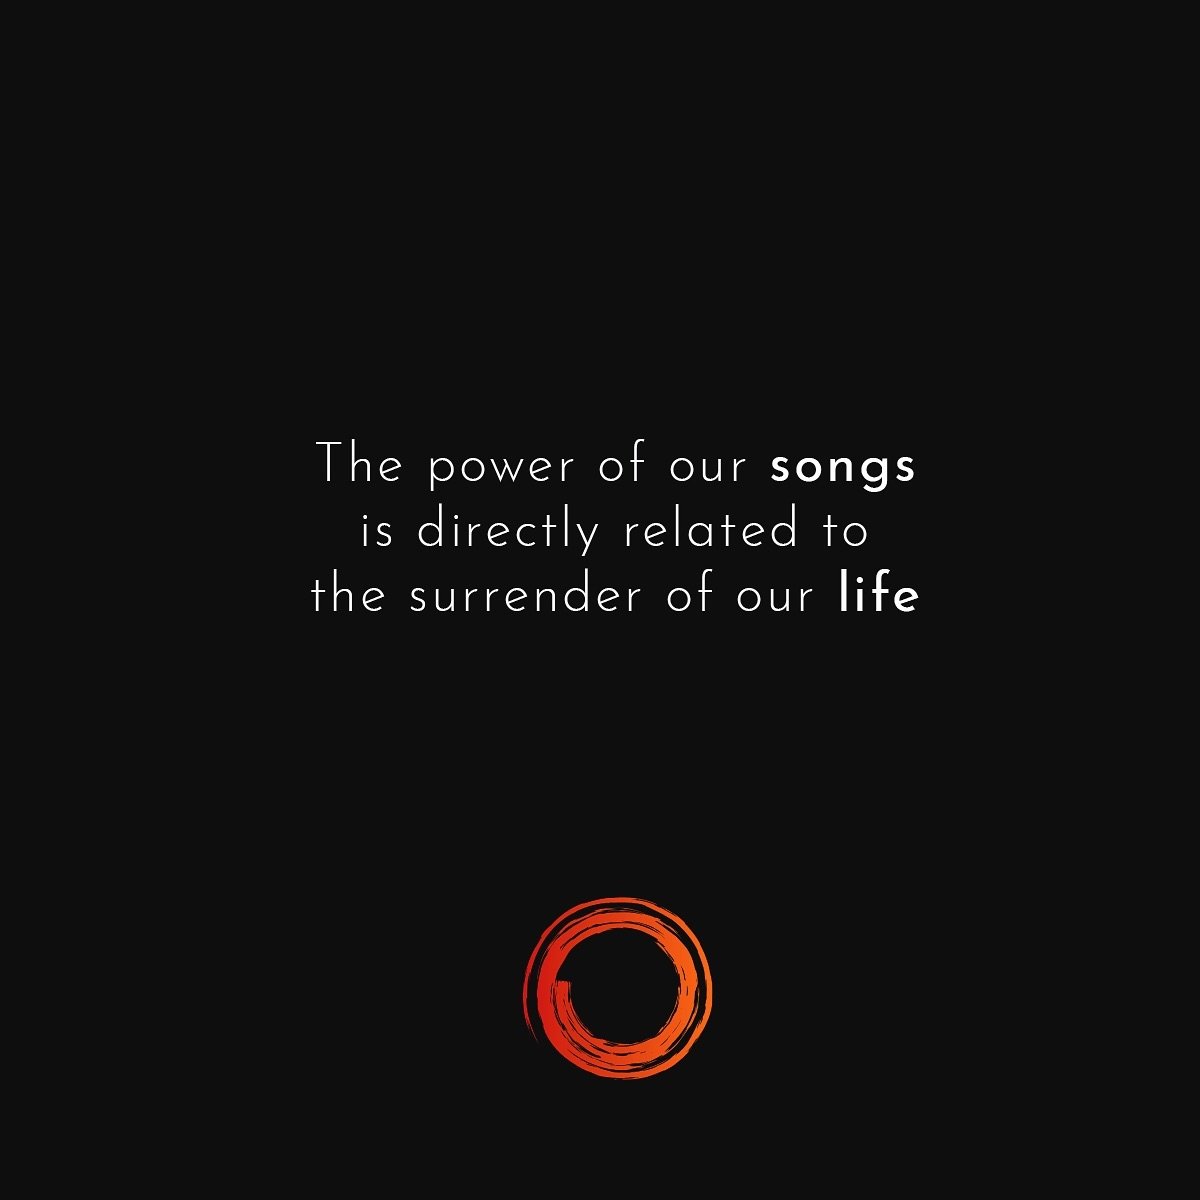 Y O U R  L I F E =  S O N G //⁣⠀
⠀⠀⠀⠀⠀⠀⠀⠀
There are some great songs in the Church throughout history and at present. Though songs and lyrics are powerful...the same song can be sung by different people and have a drastically different impact.⁣⠀⠀⠀⠀⠀⠀